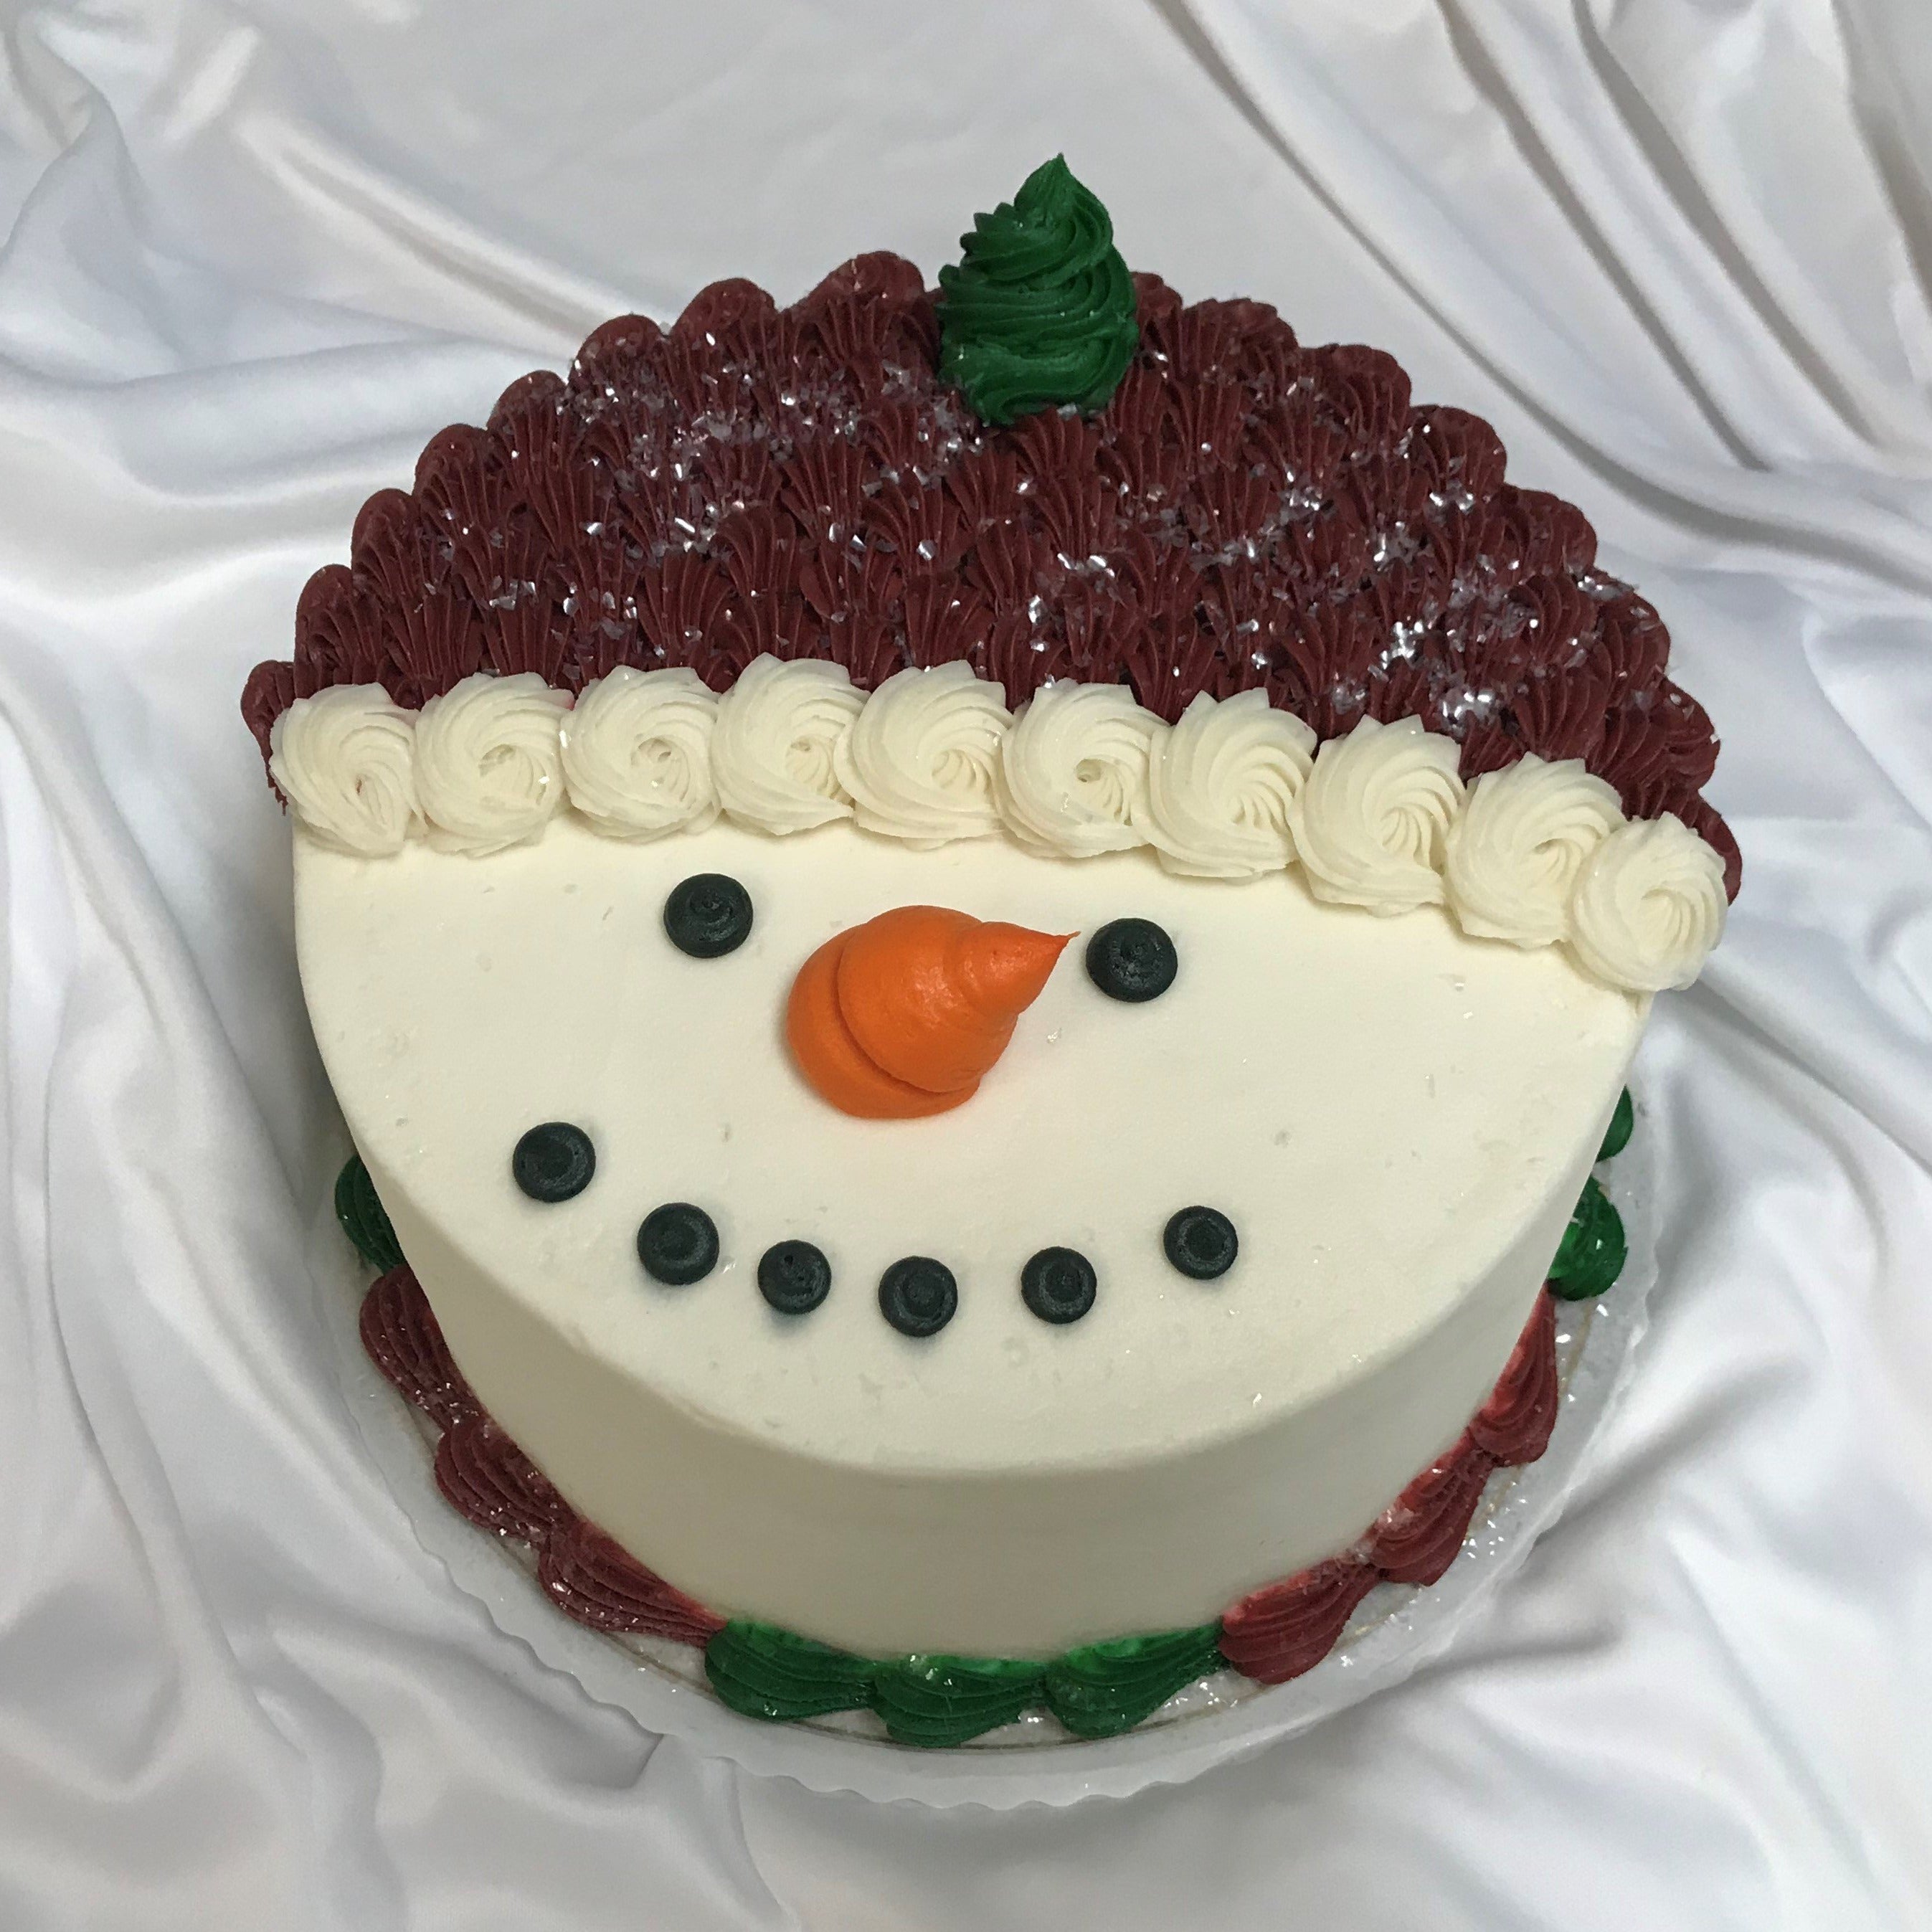 Iced Gluten Free Fruit Cake 8 inch - Noddy's Cakes and Cafe